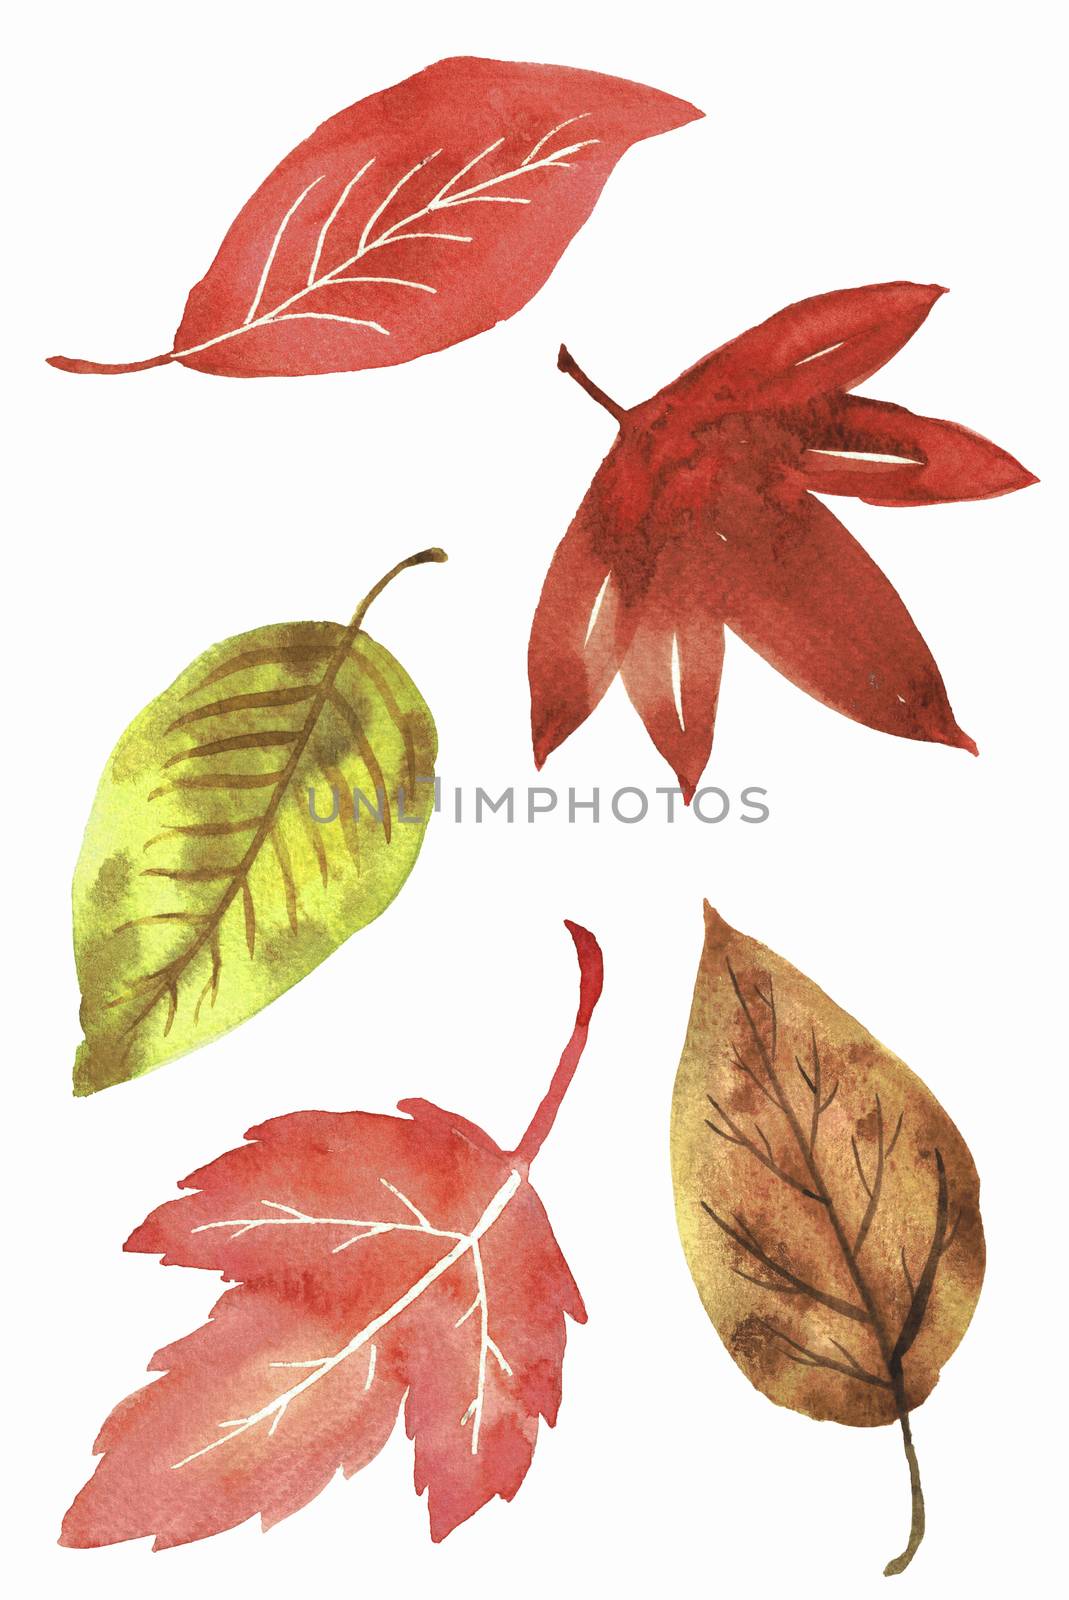 colourful autumn leaves on a white background. Watercolor collec by Ungamrung